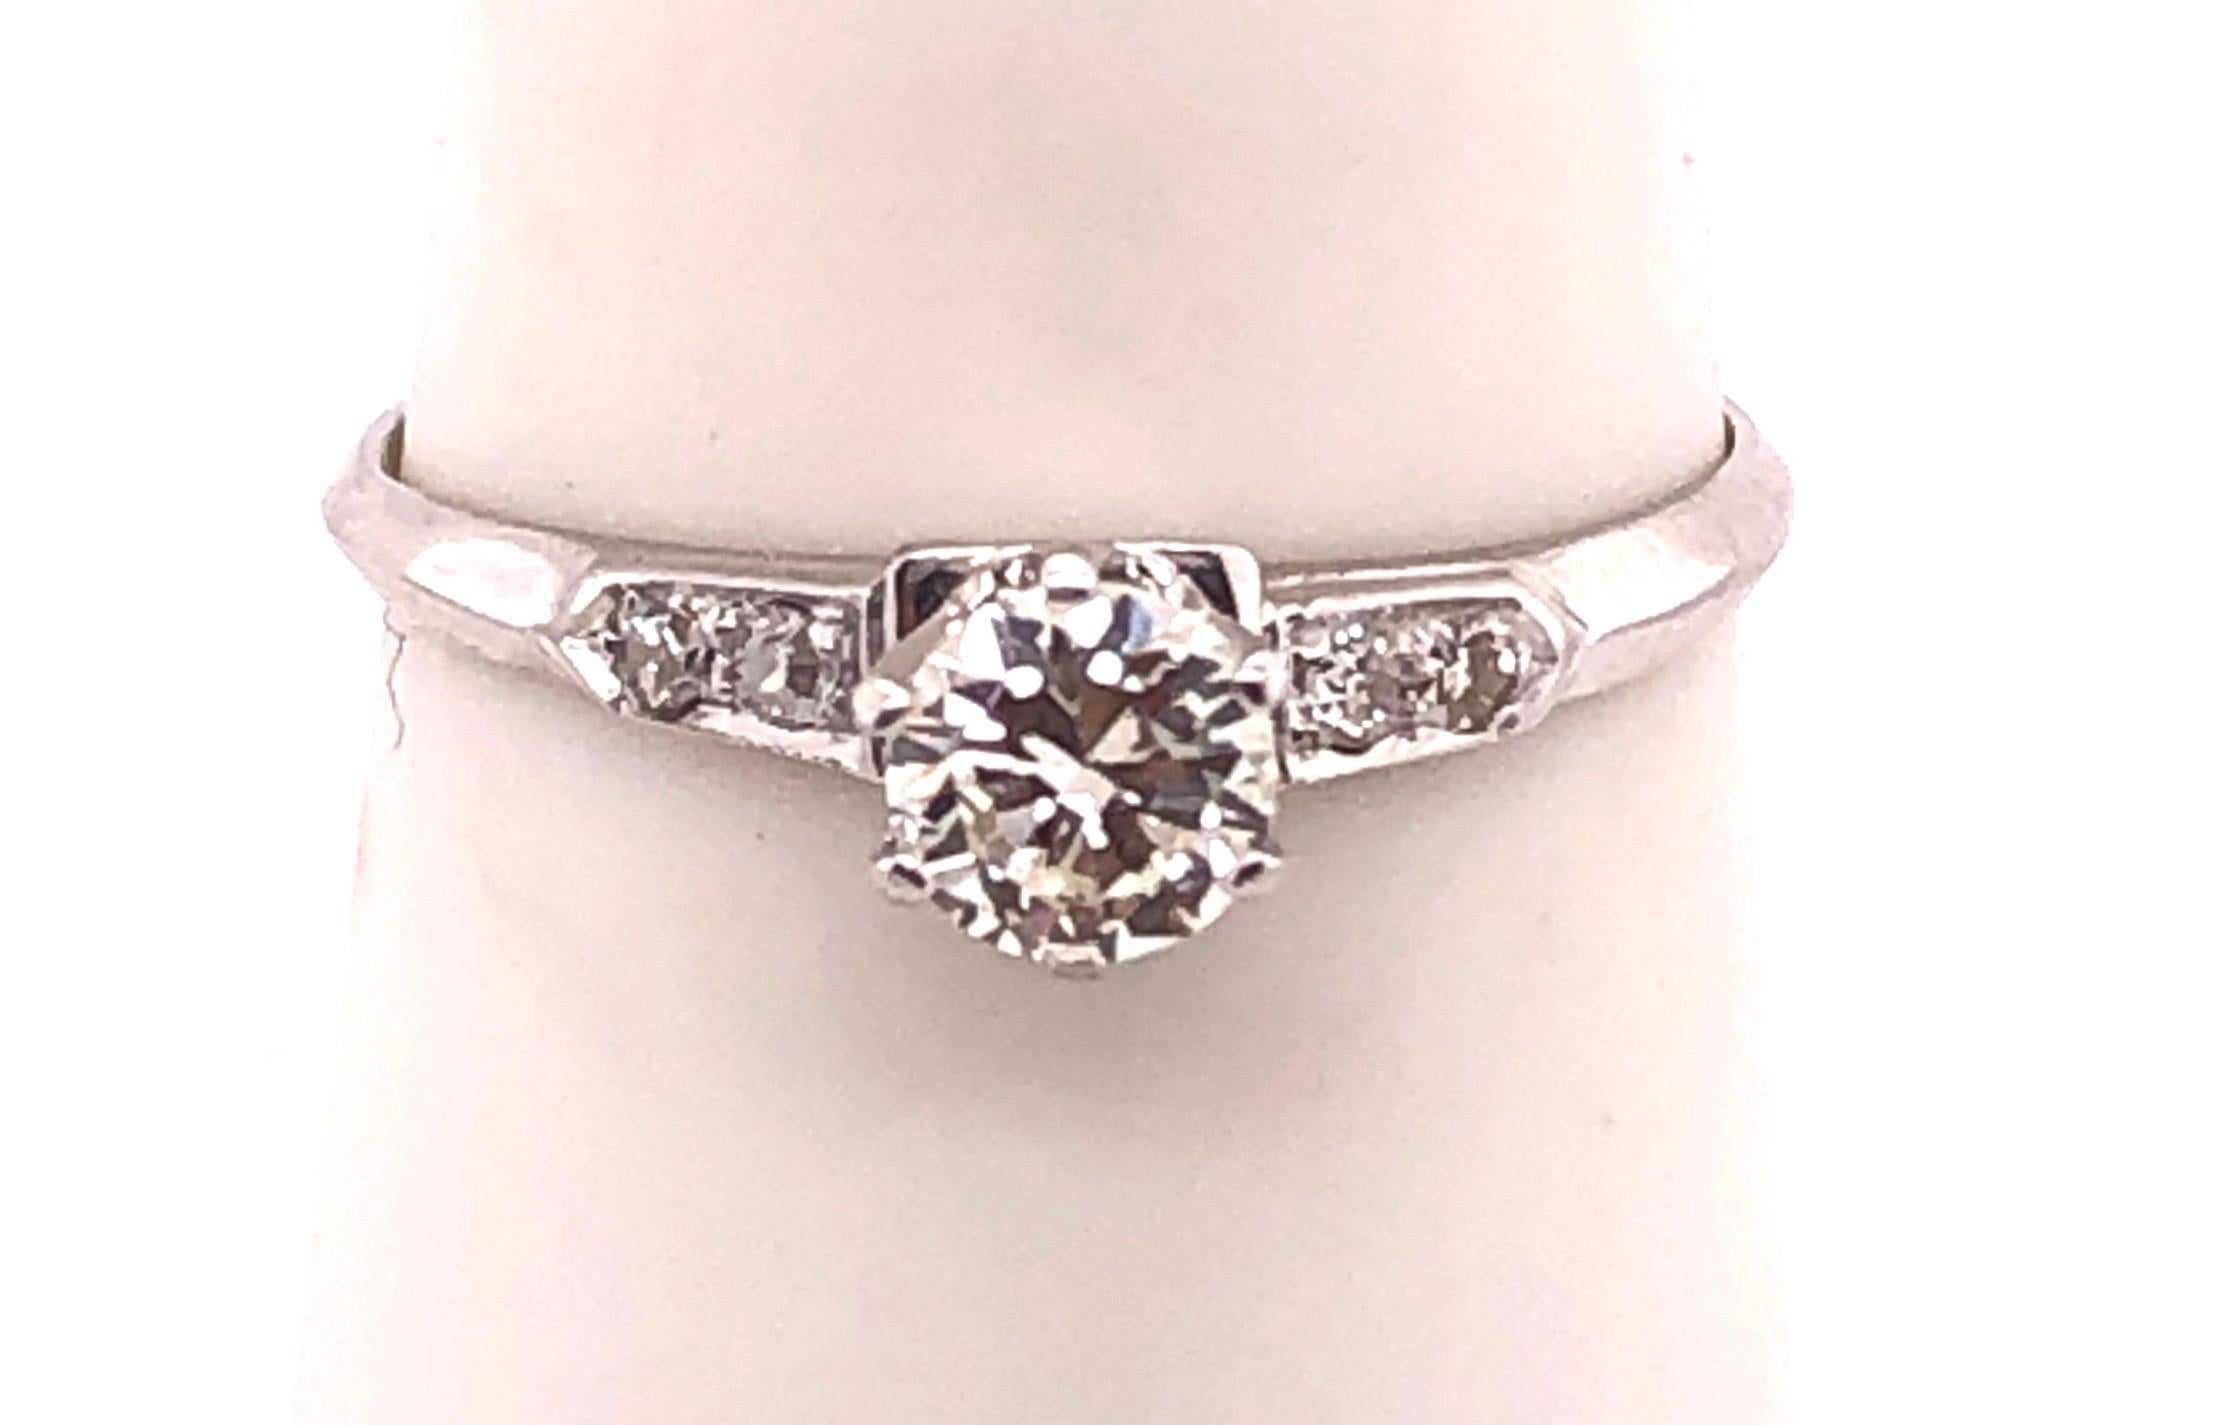 14Kt White Gold Engagement Ring 0.38 Total Diamond Weight
size 7.5 with 1.46 grams total weight